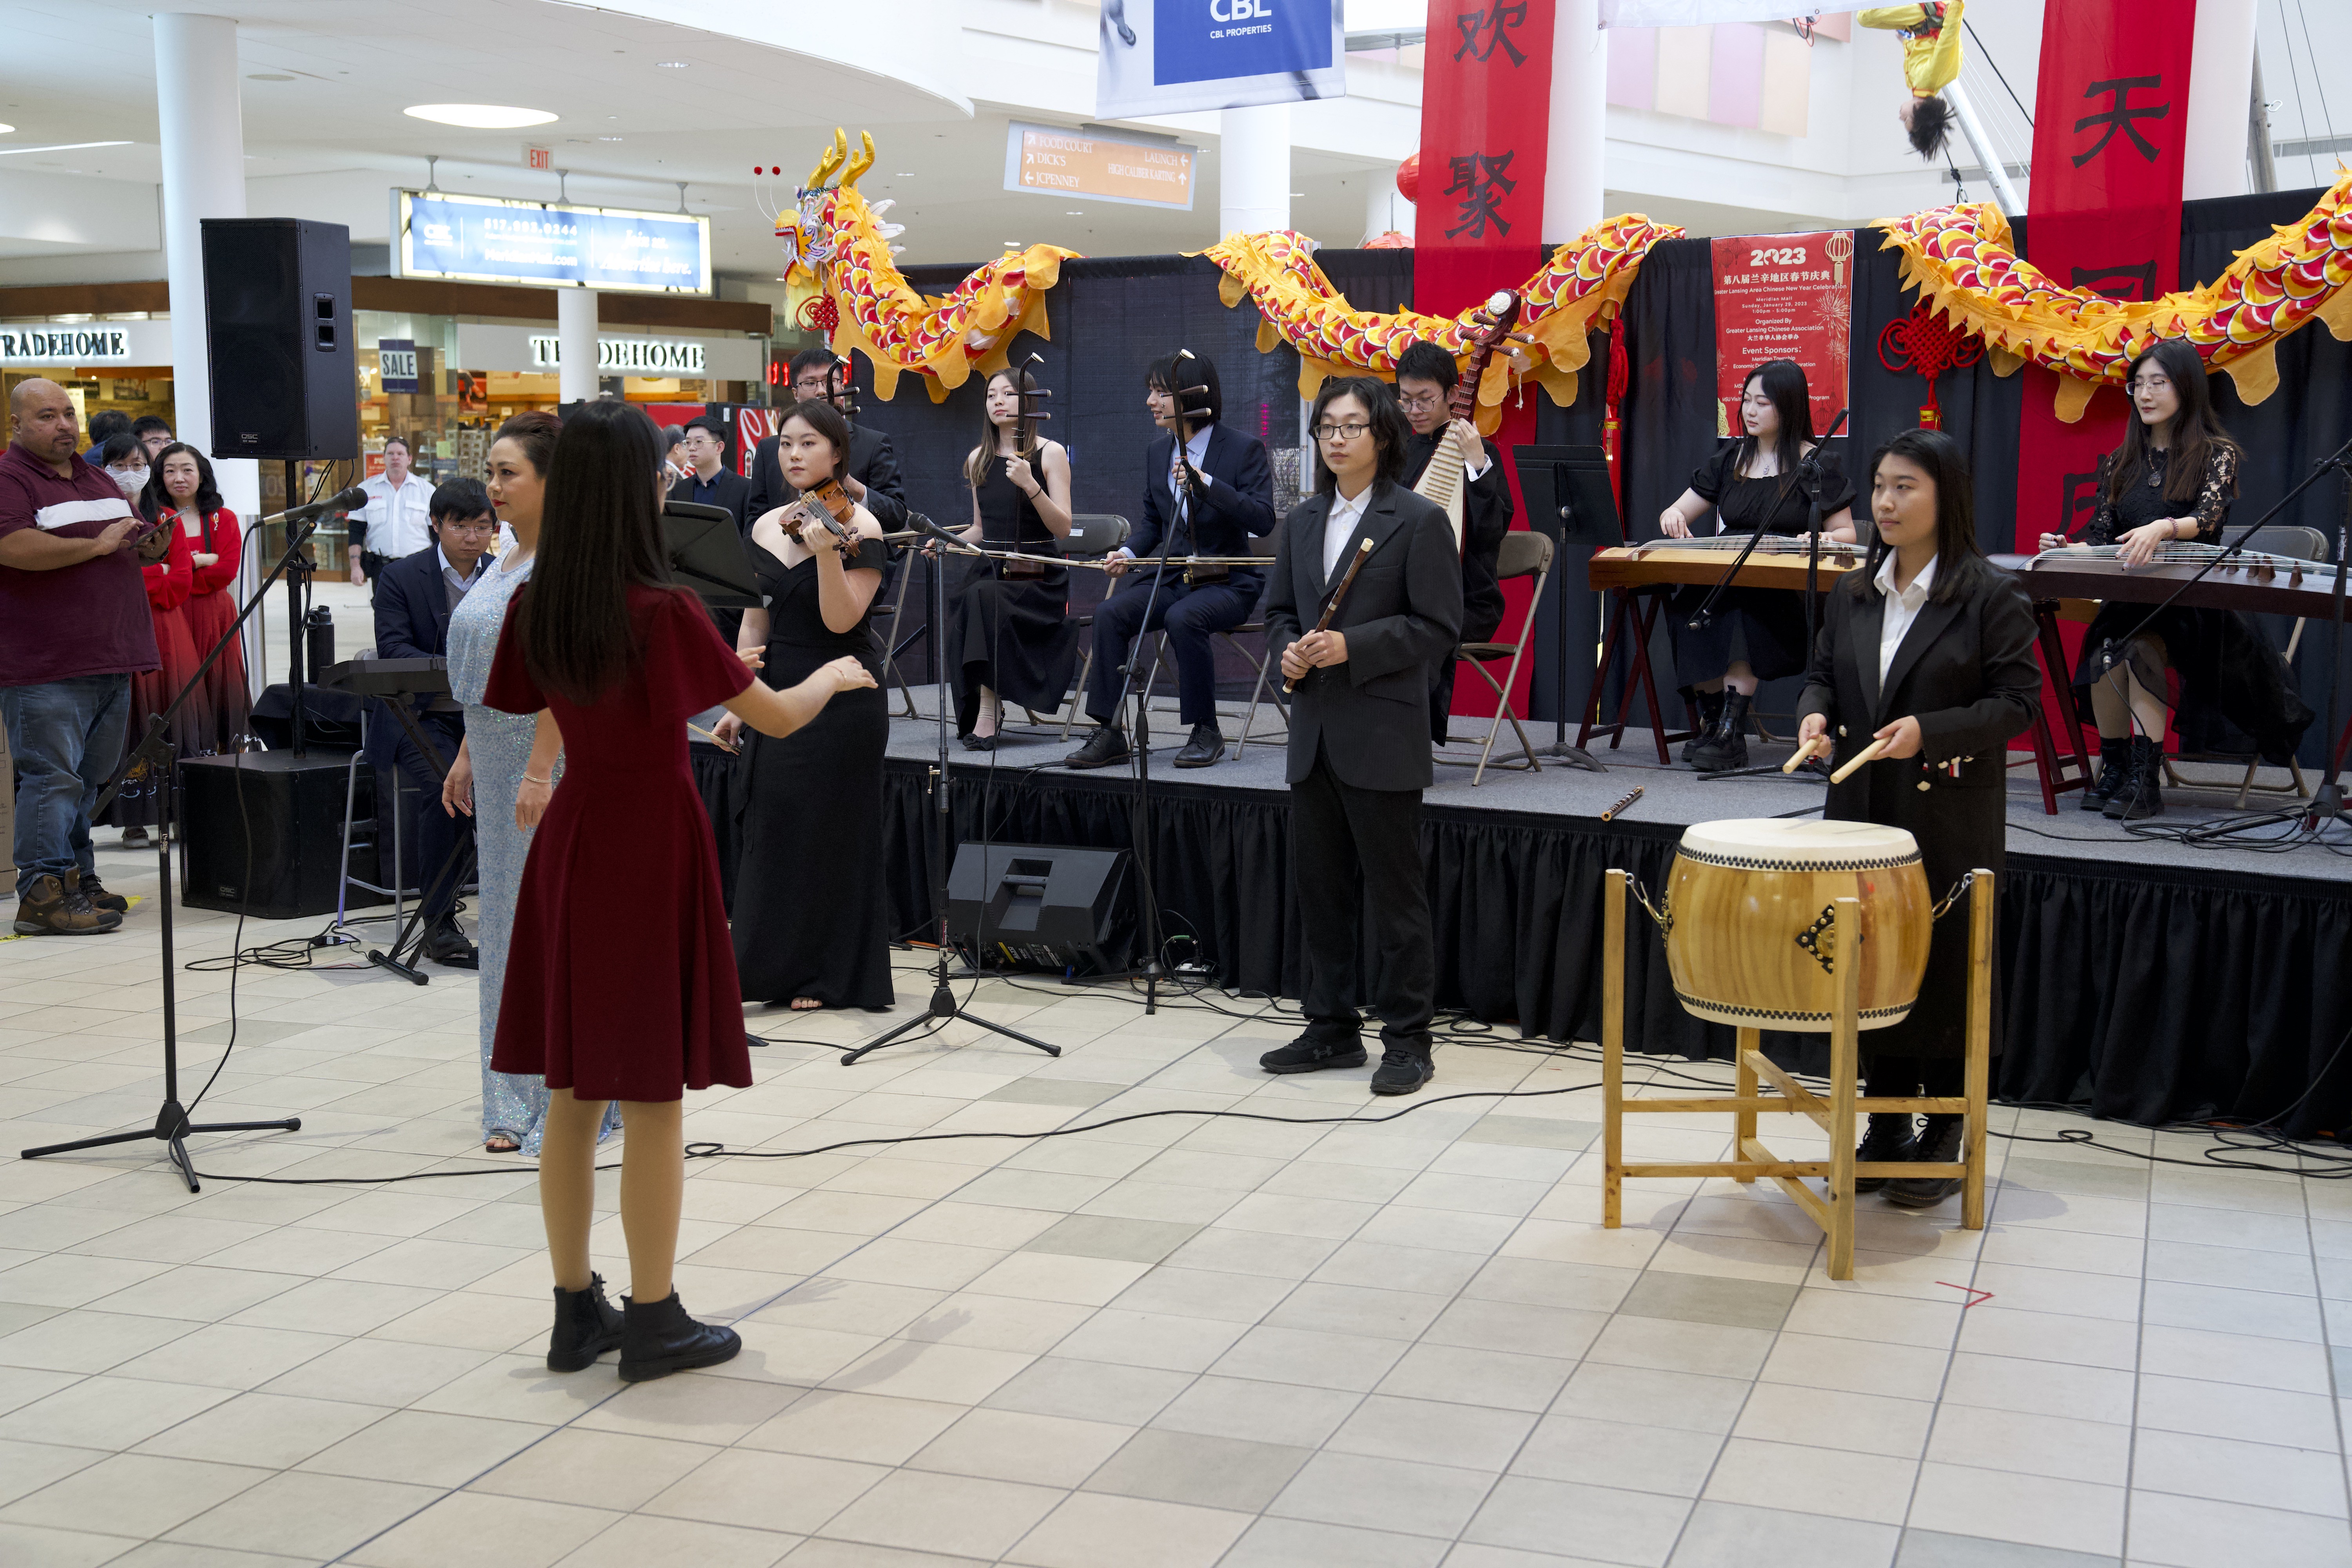 Meridian Township Celebrates Chinese New Year Once Again